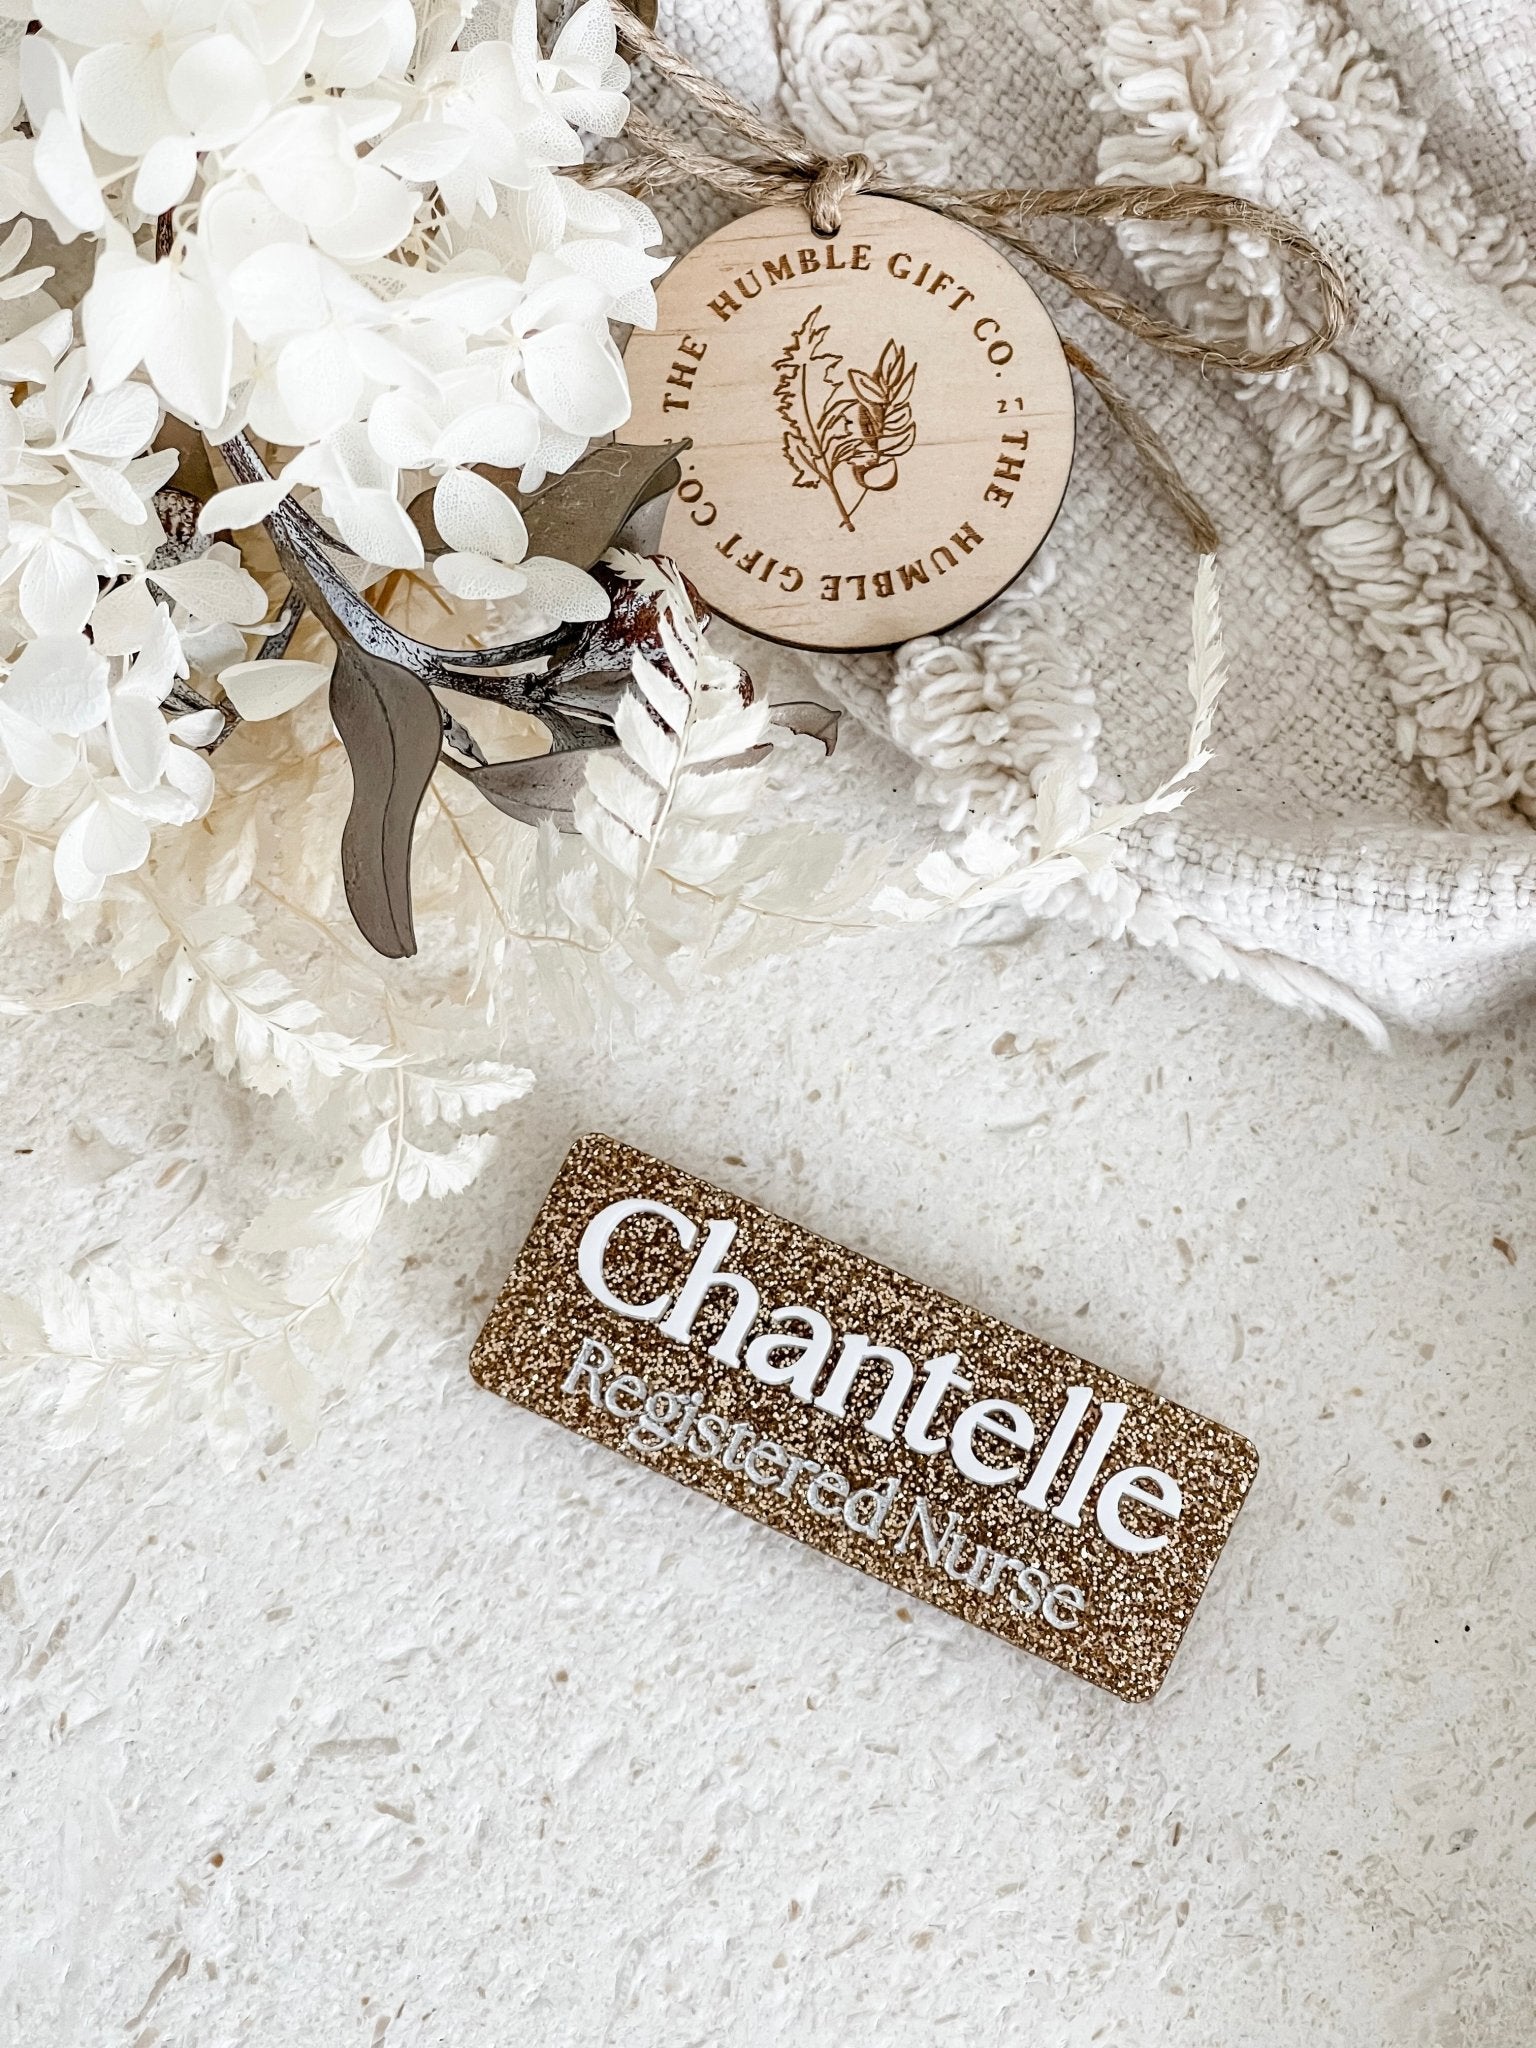 Name Badge with Occupation - Glitter Acrylic - The Humble Gift Co.